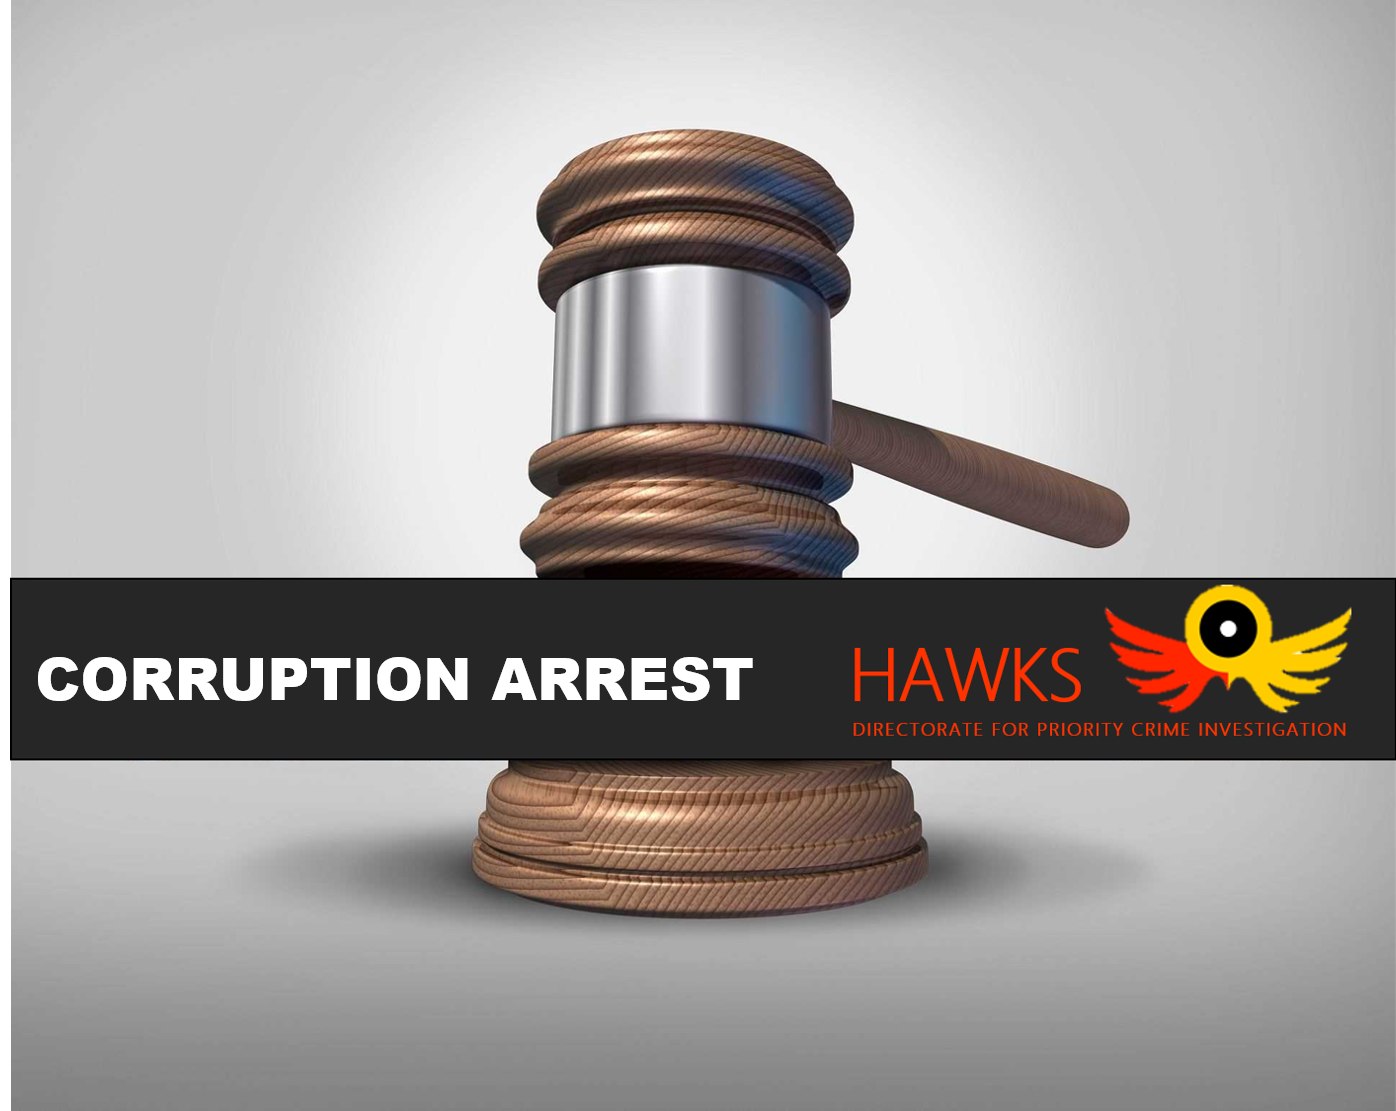 Two Traffic Department Officials arrested for corruption